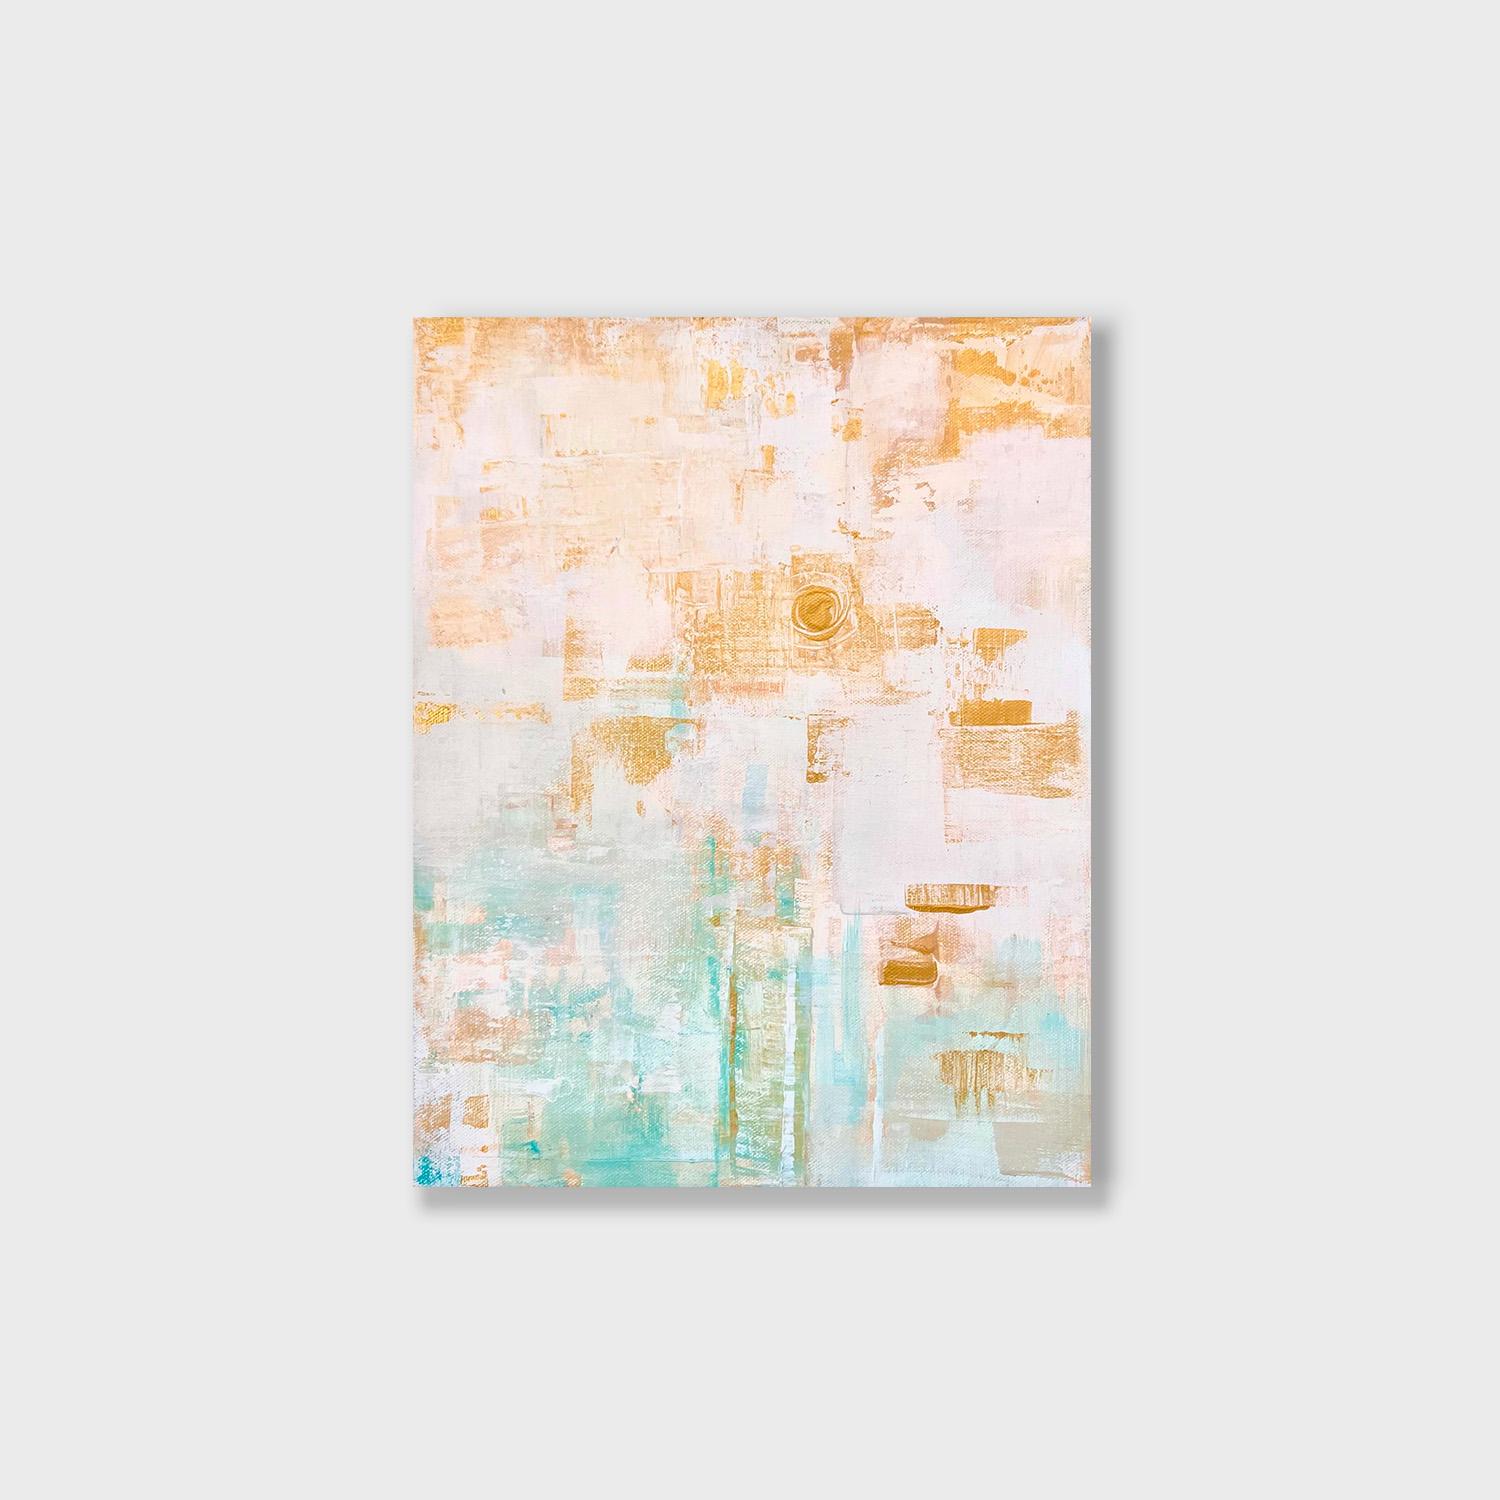 Stefanie Bales Abstract Painting - An Abstract Acrylic on Canvas Painting, "Moonsun"